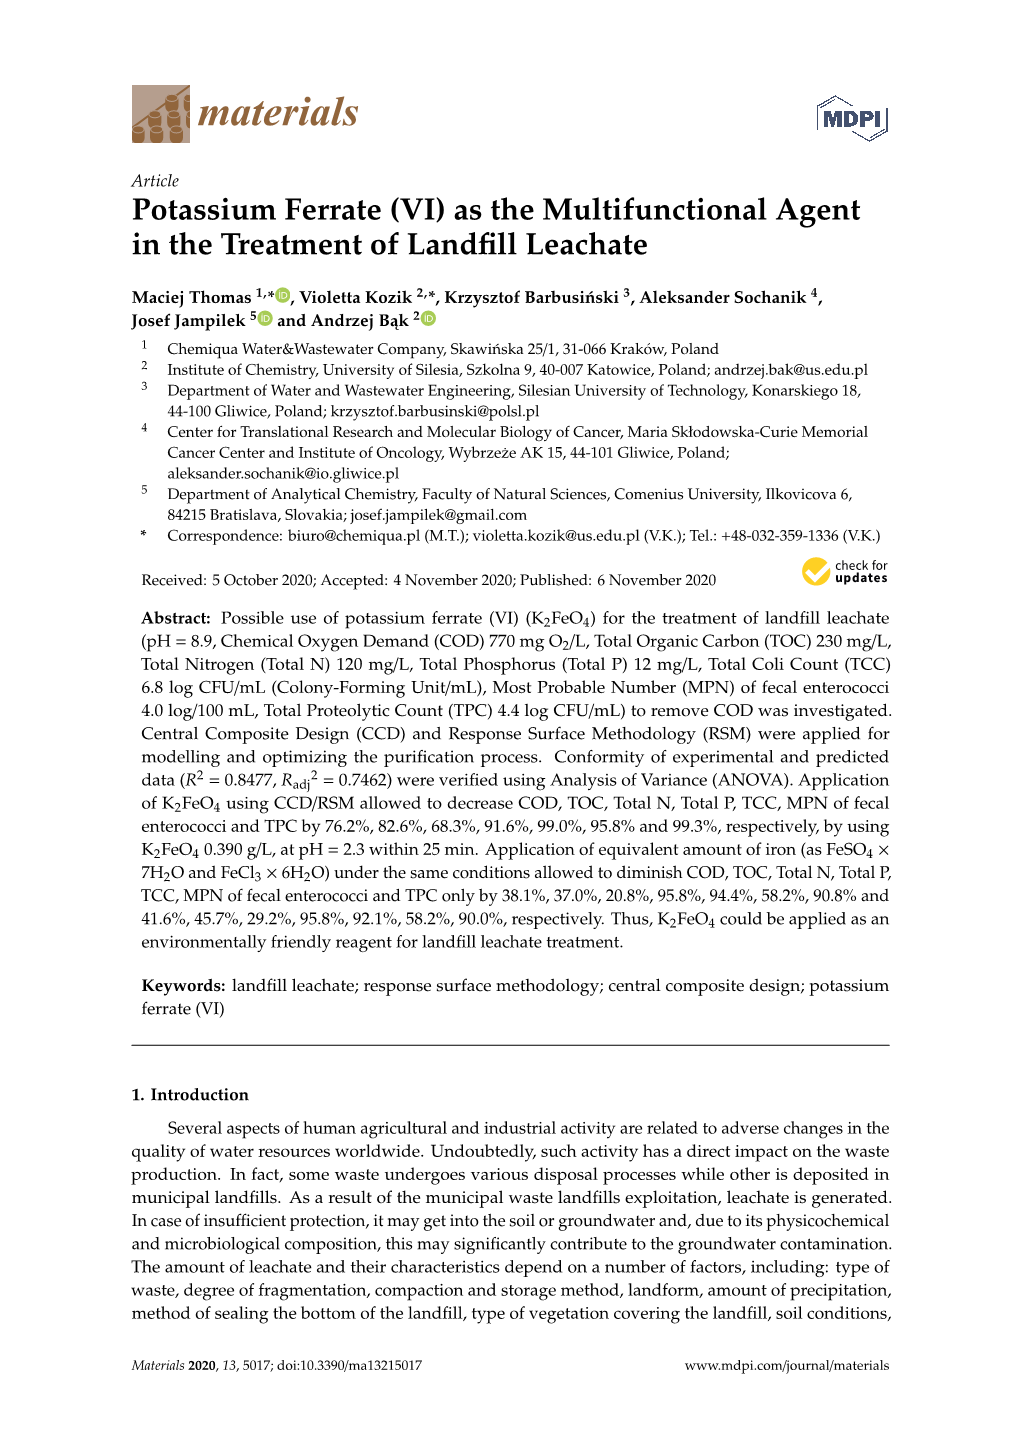 Potassium Ferrate (VI) As the Multifunctional Agent in the Treatment of Landfill Leachate